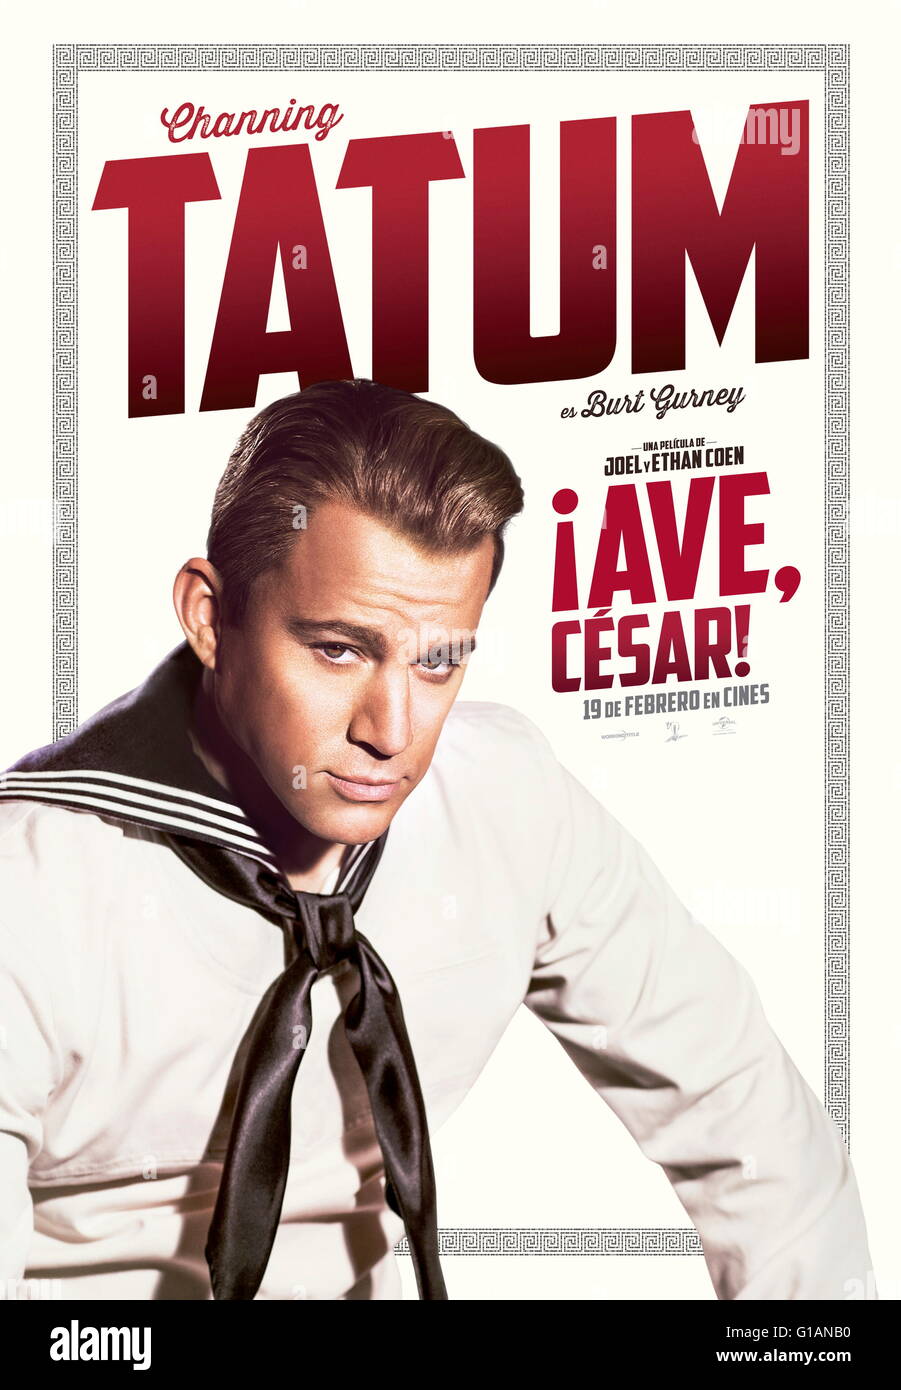 RELEASE DATE: February 5, 2016 TITLE: Hail, Caesar! STUDIO: Universal Pictures DIRECTOR: Ethan Coen, Joel Coen PLOT: A Hollywood fixer in the 1950s works to keep the studio's stars in line PICTURED: Channing Tatum (Credit: c Universal Pictures/Entertainment Pictures/) Stock Photo